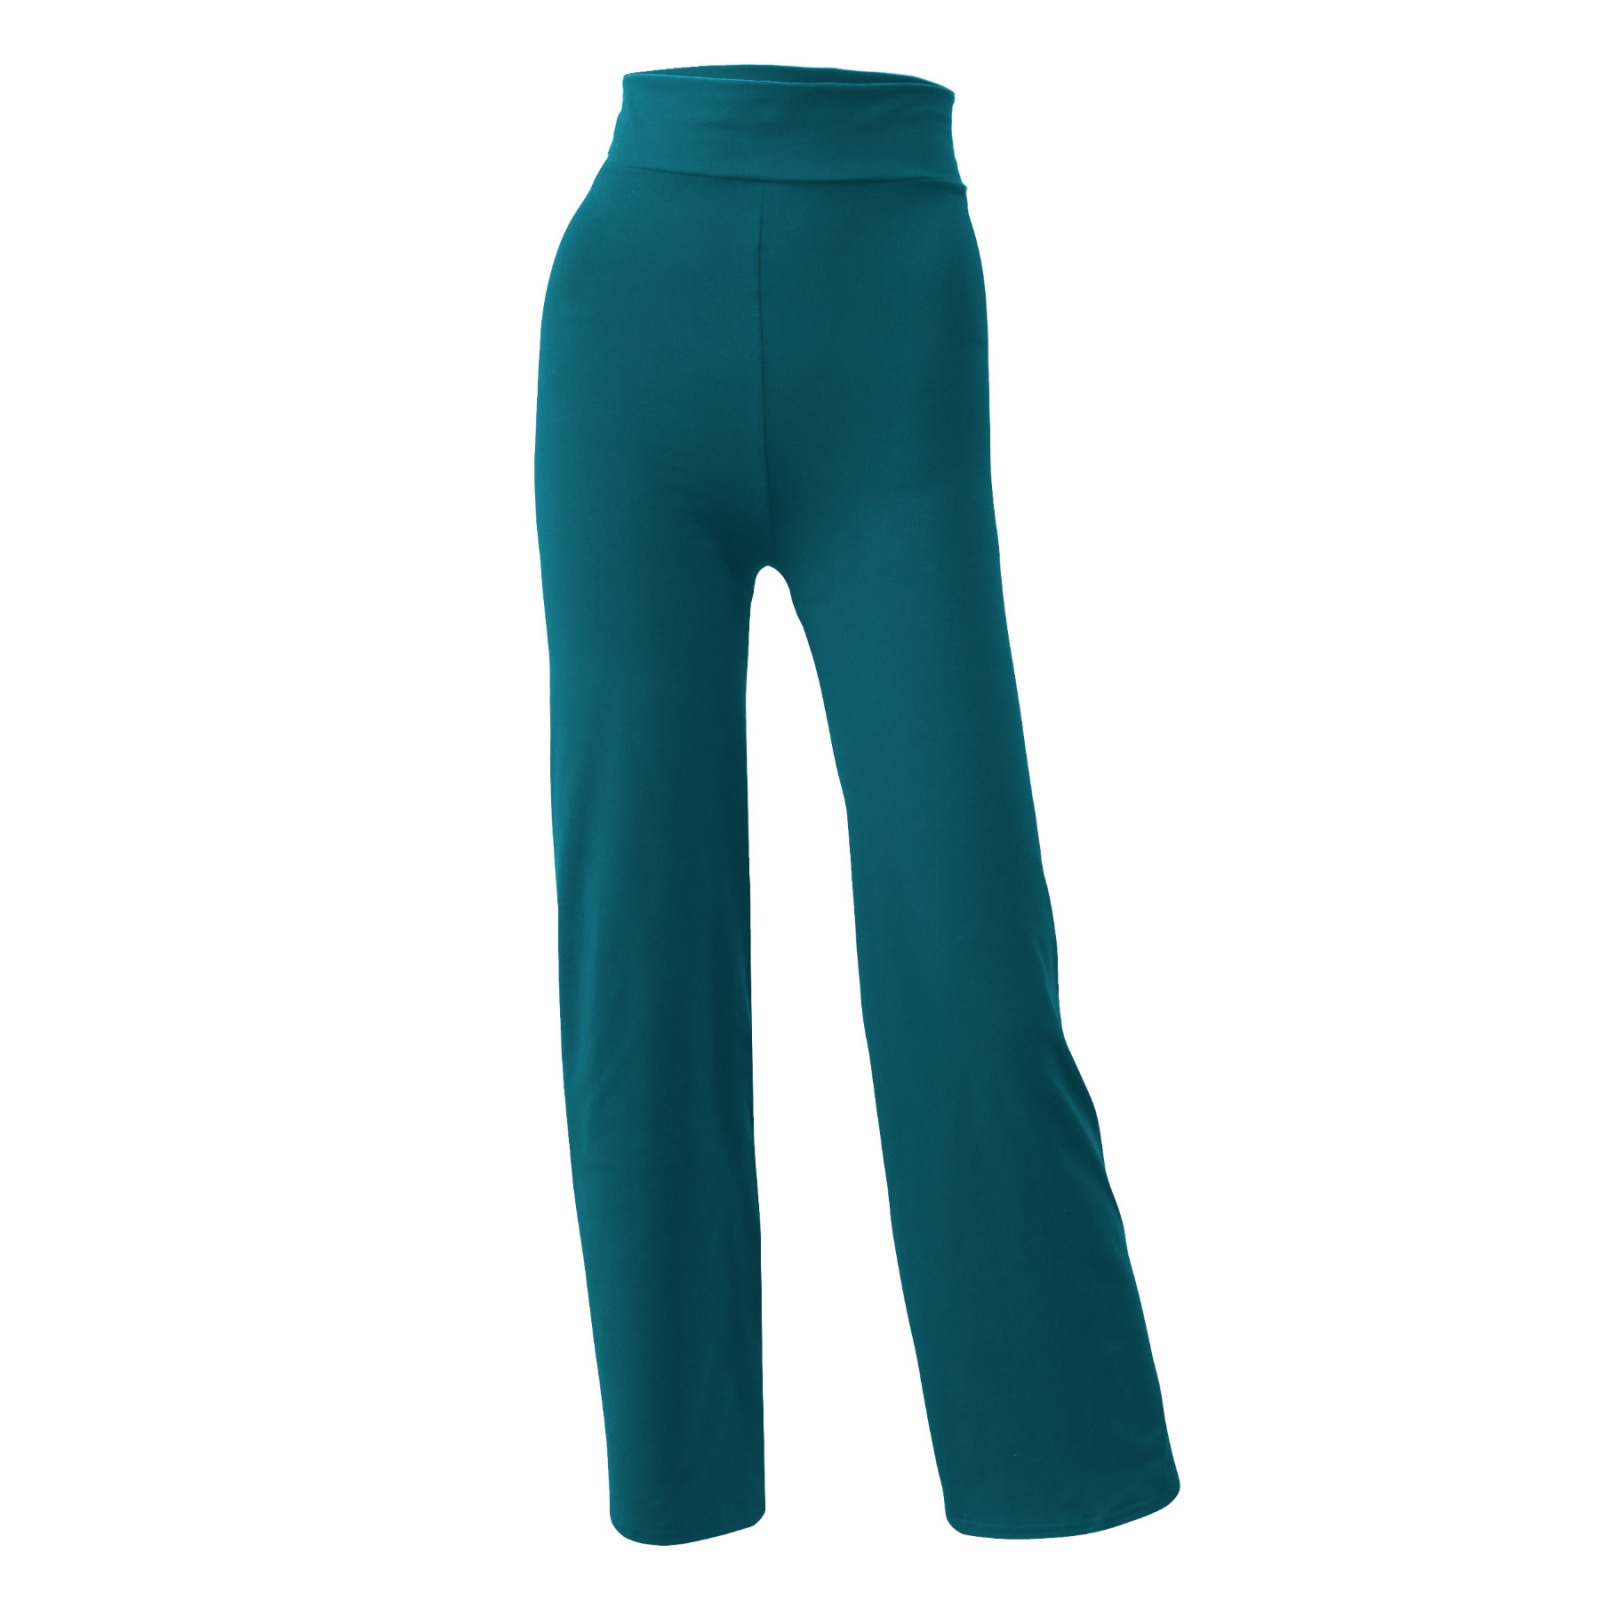 Yoga pants Relaxed Fit teal (blue), Online Shop